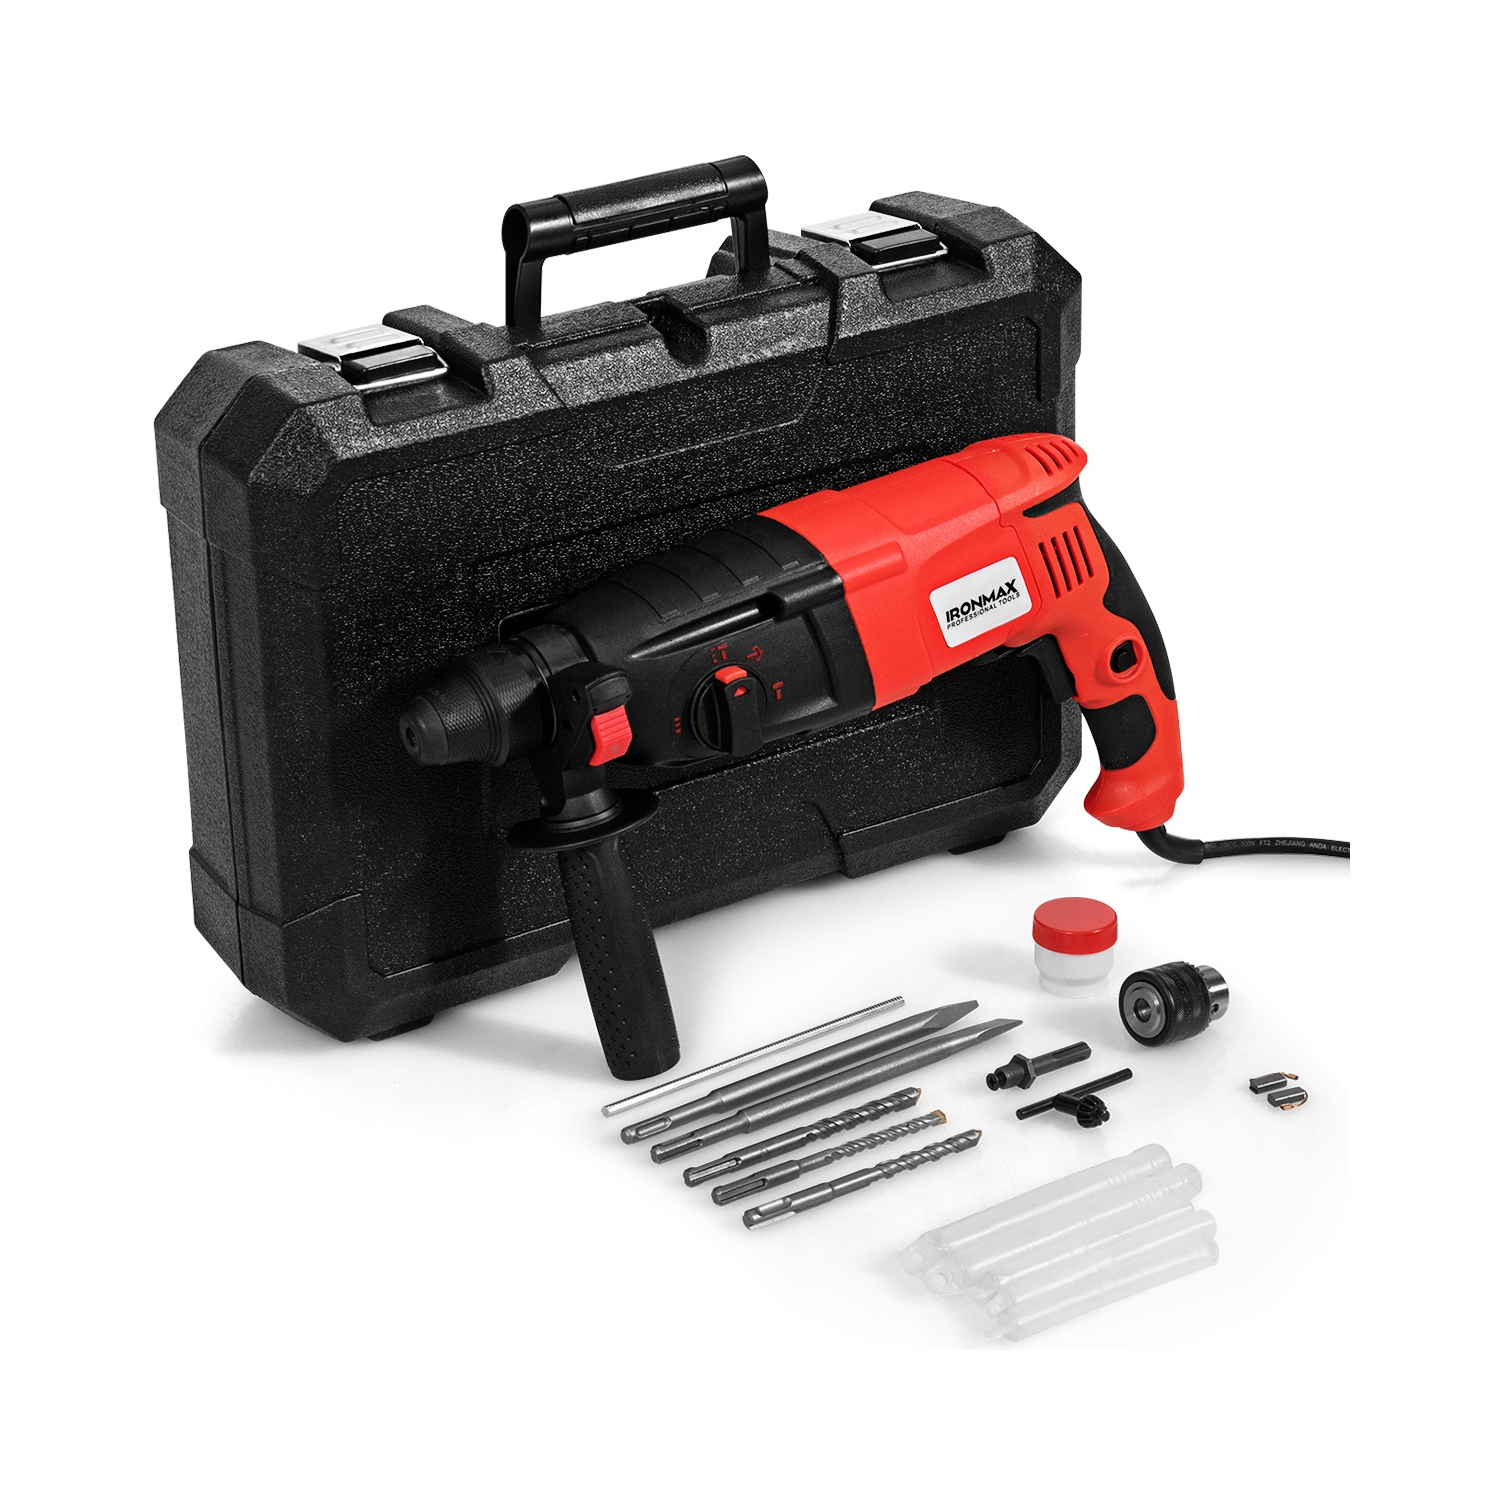 Costway 1/2'' Electric Rotary Hammer Drill 3 Mode SDS-Plus Chisel Kit 1100W